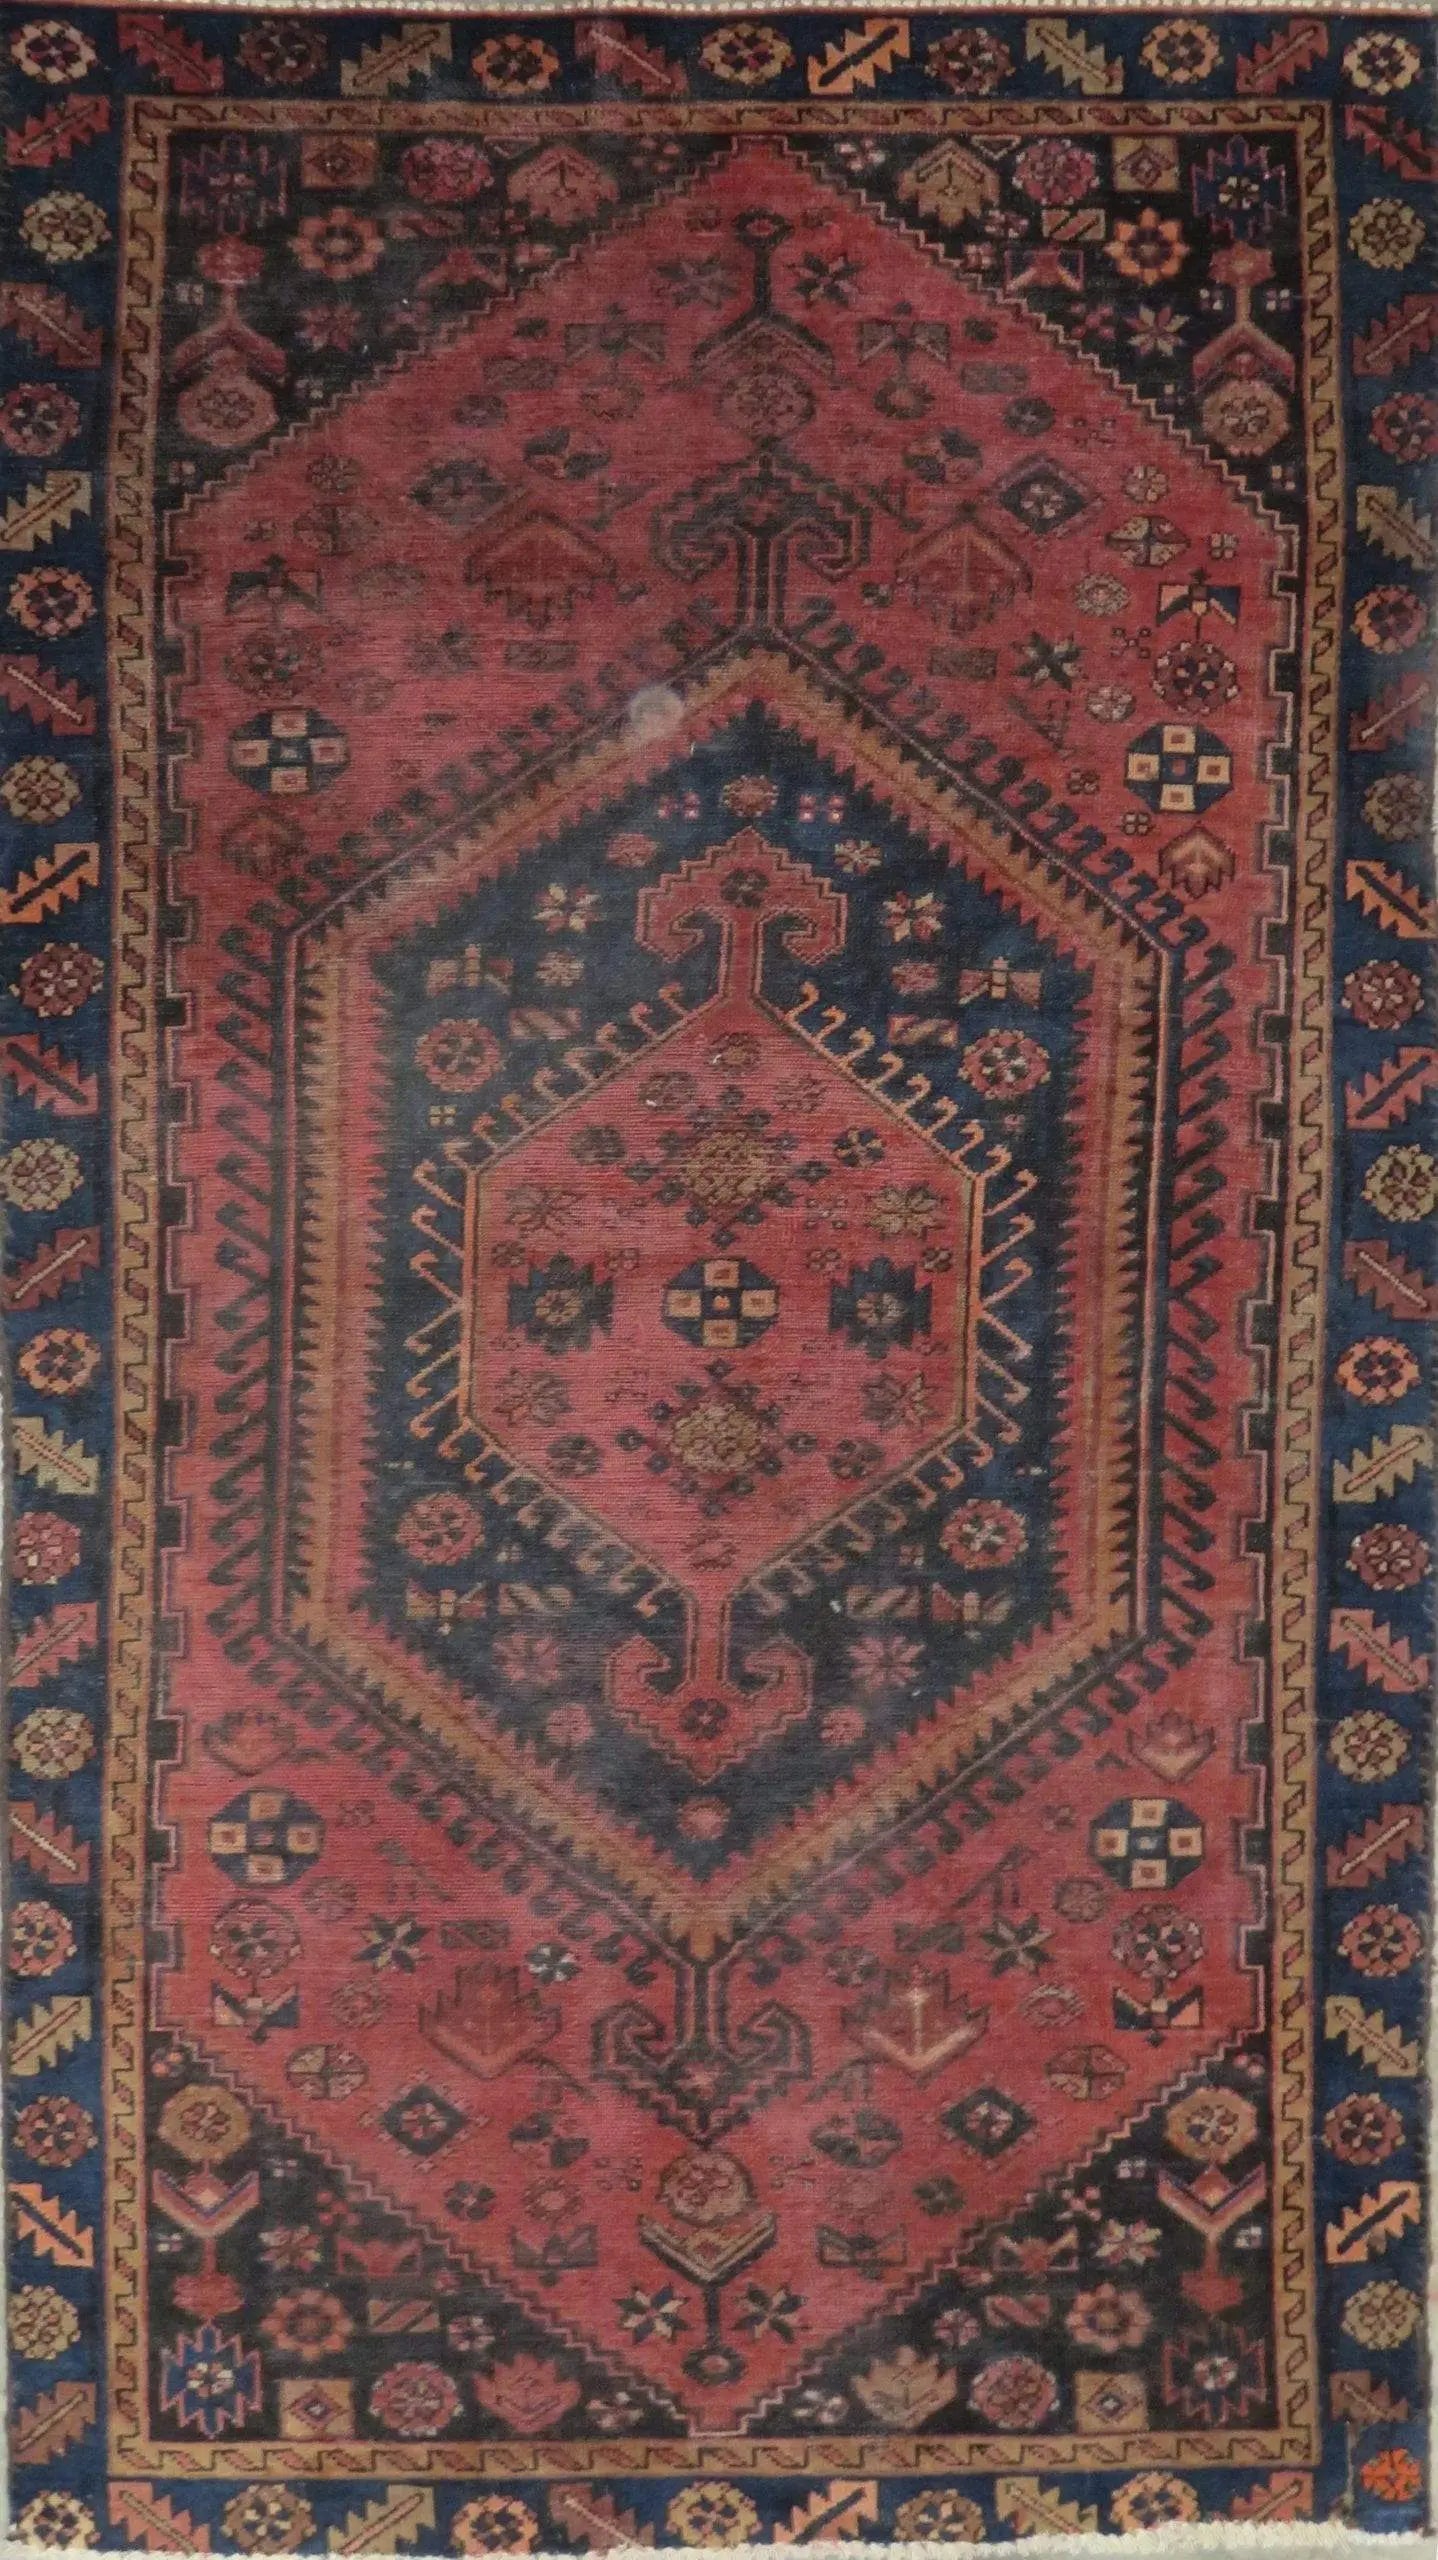 Hand-Knotted Persian Wool Rug _ Luxurious Vintage Design, 7'3" x 3'9", Artisan Crafted